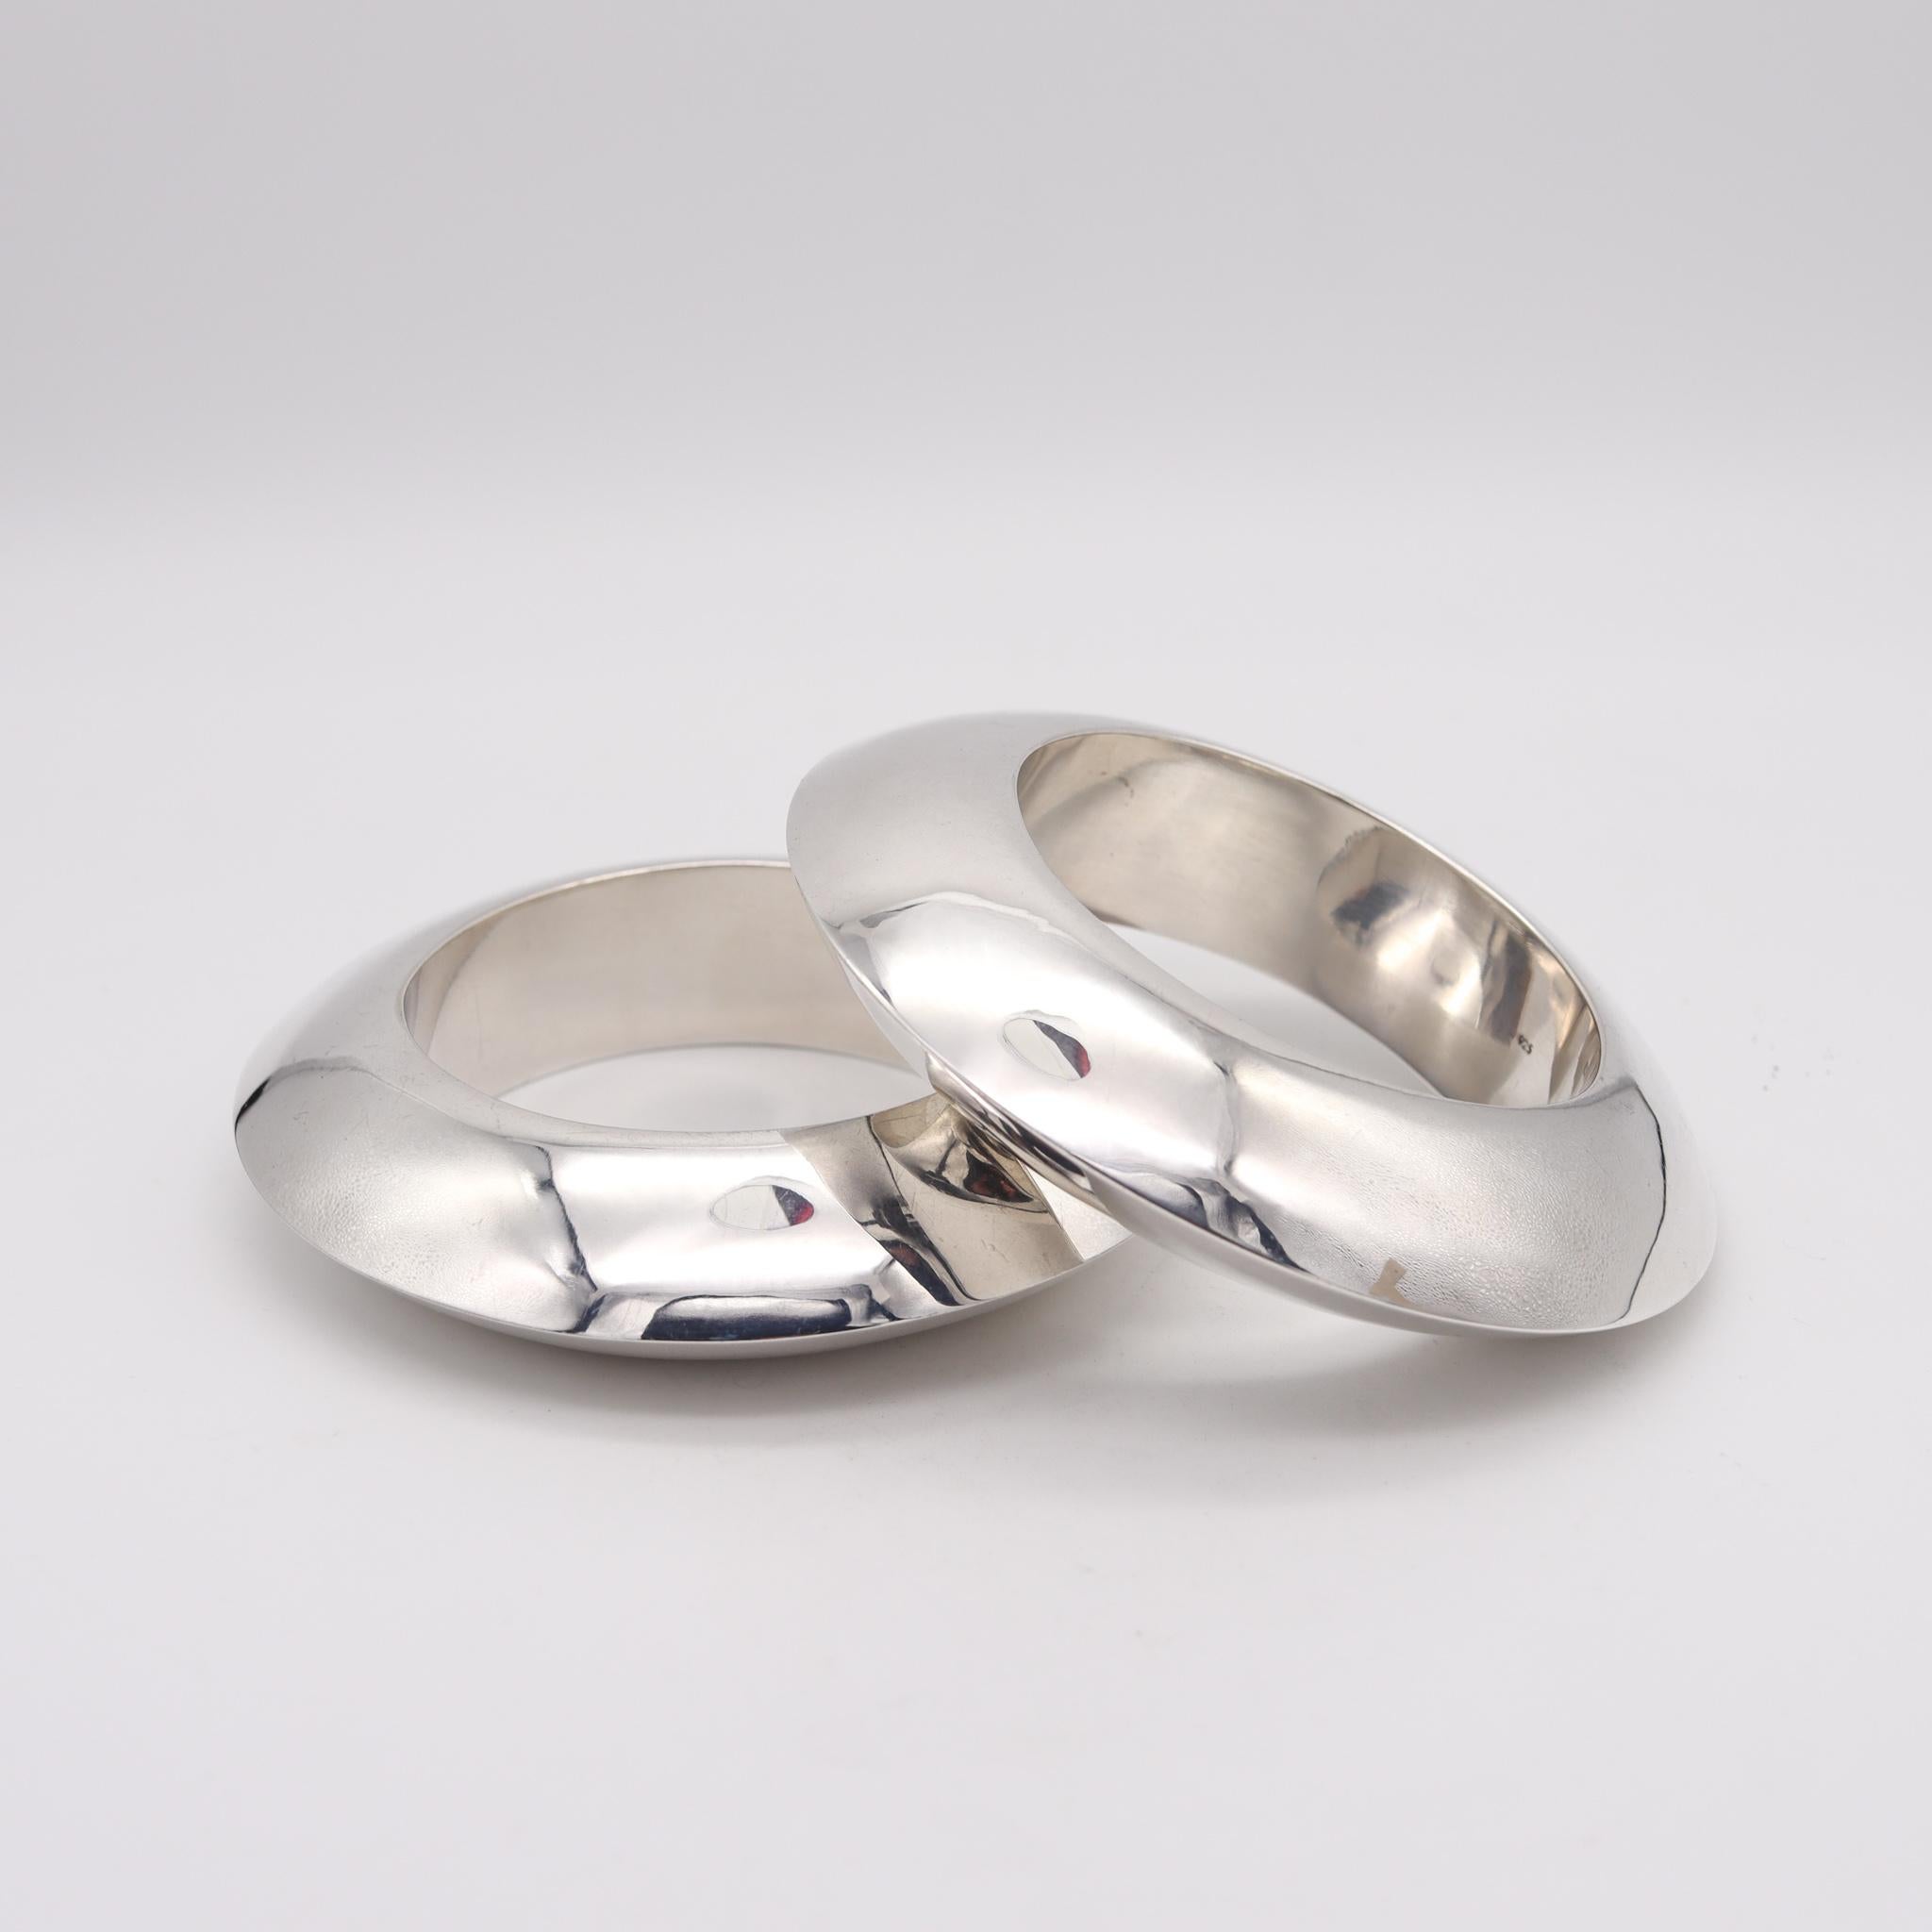 Pair of modernist bangle bracelets.

Pair of stupendous of Vintage bangles, created Italy during the modernism period back in the early 1970. These pieces has been designed with super sleek and geometric sharp shapes, in solid sterling silver